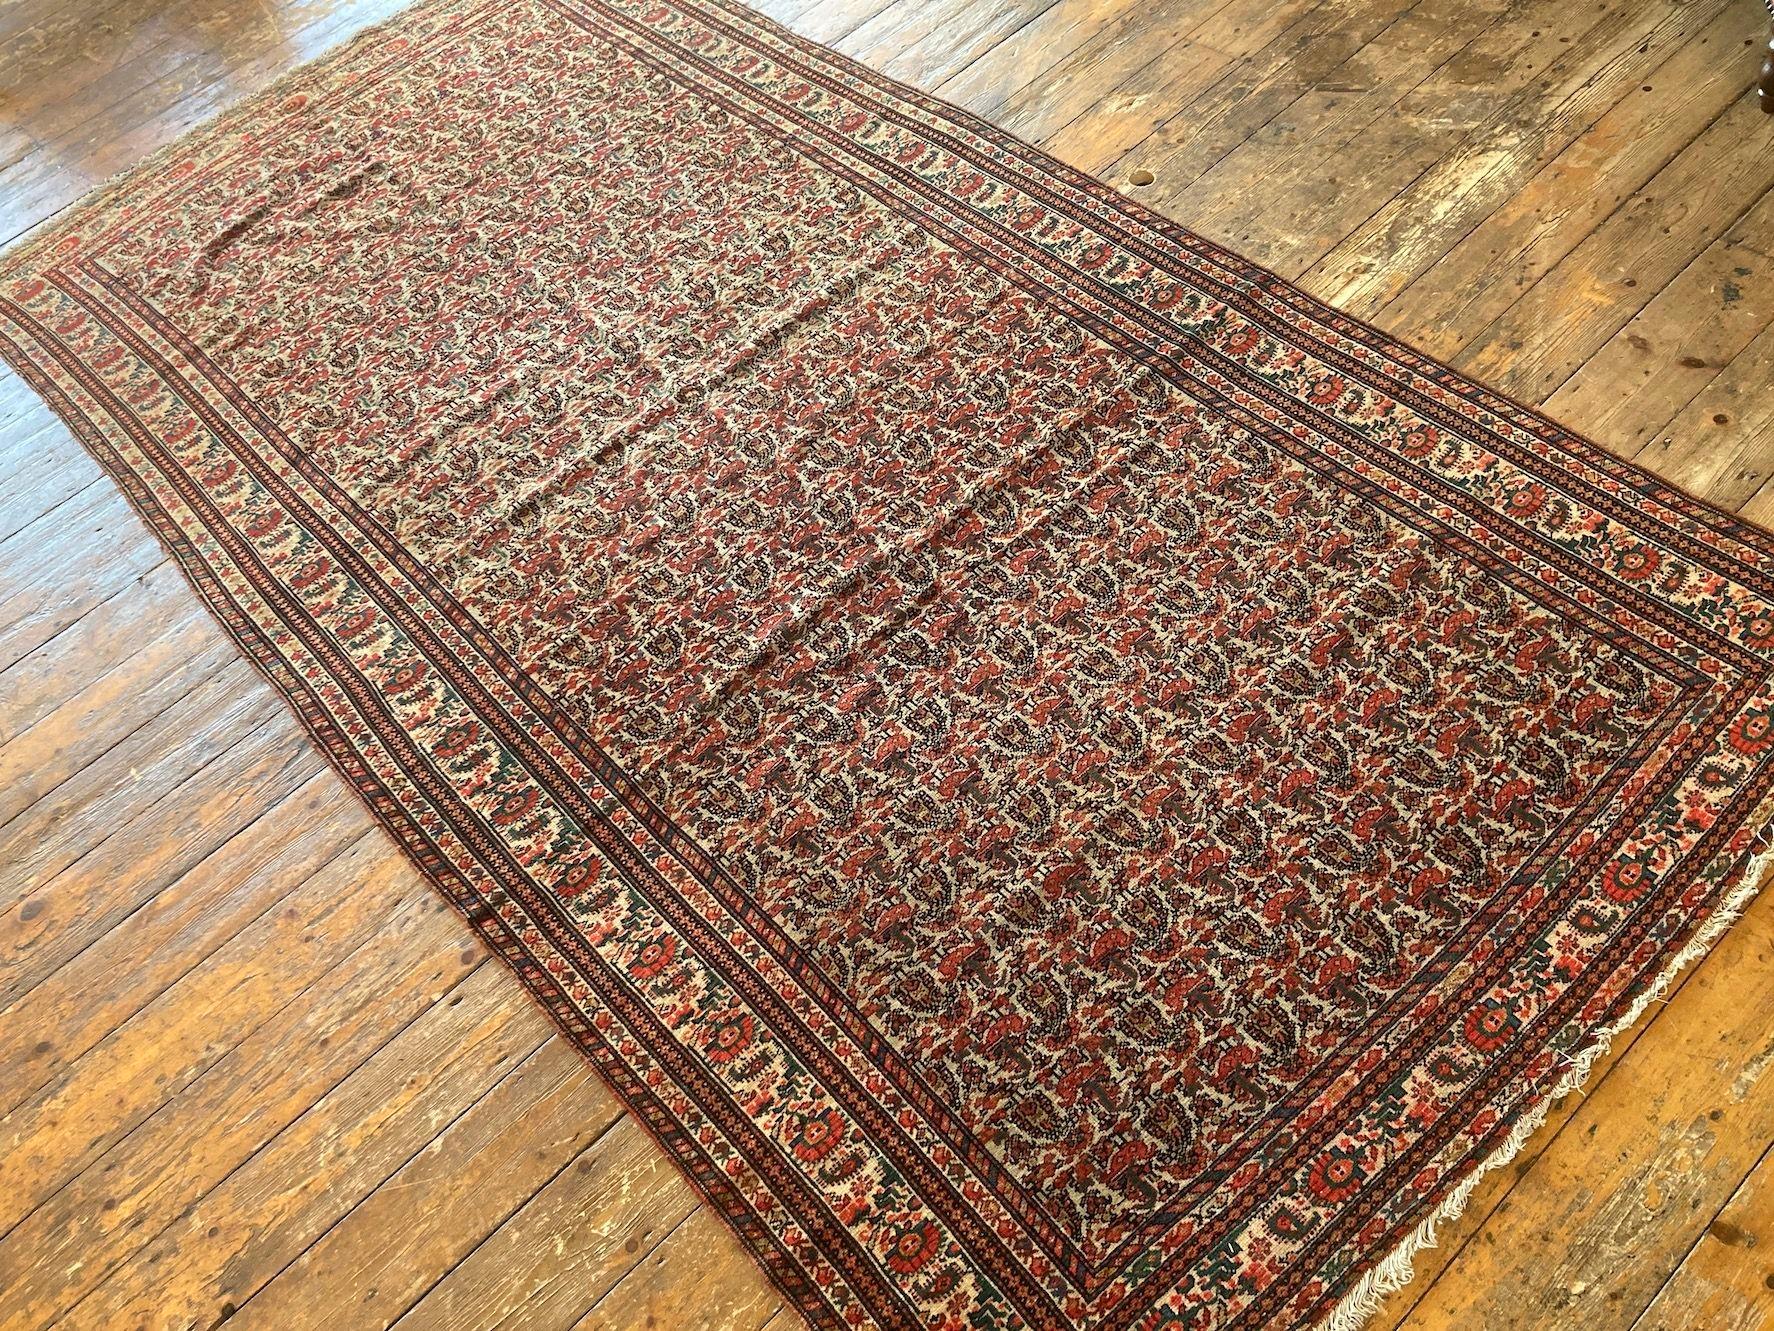 Early 20th Century Antique Malayer Runner 2.86m X 1.38m For Sale